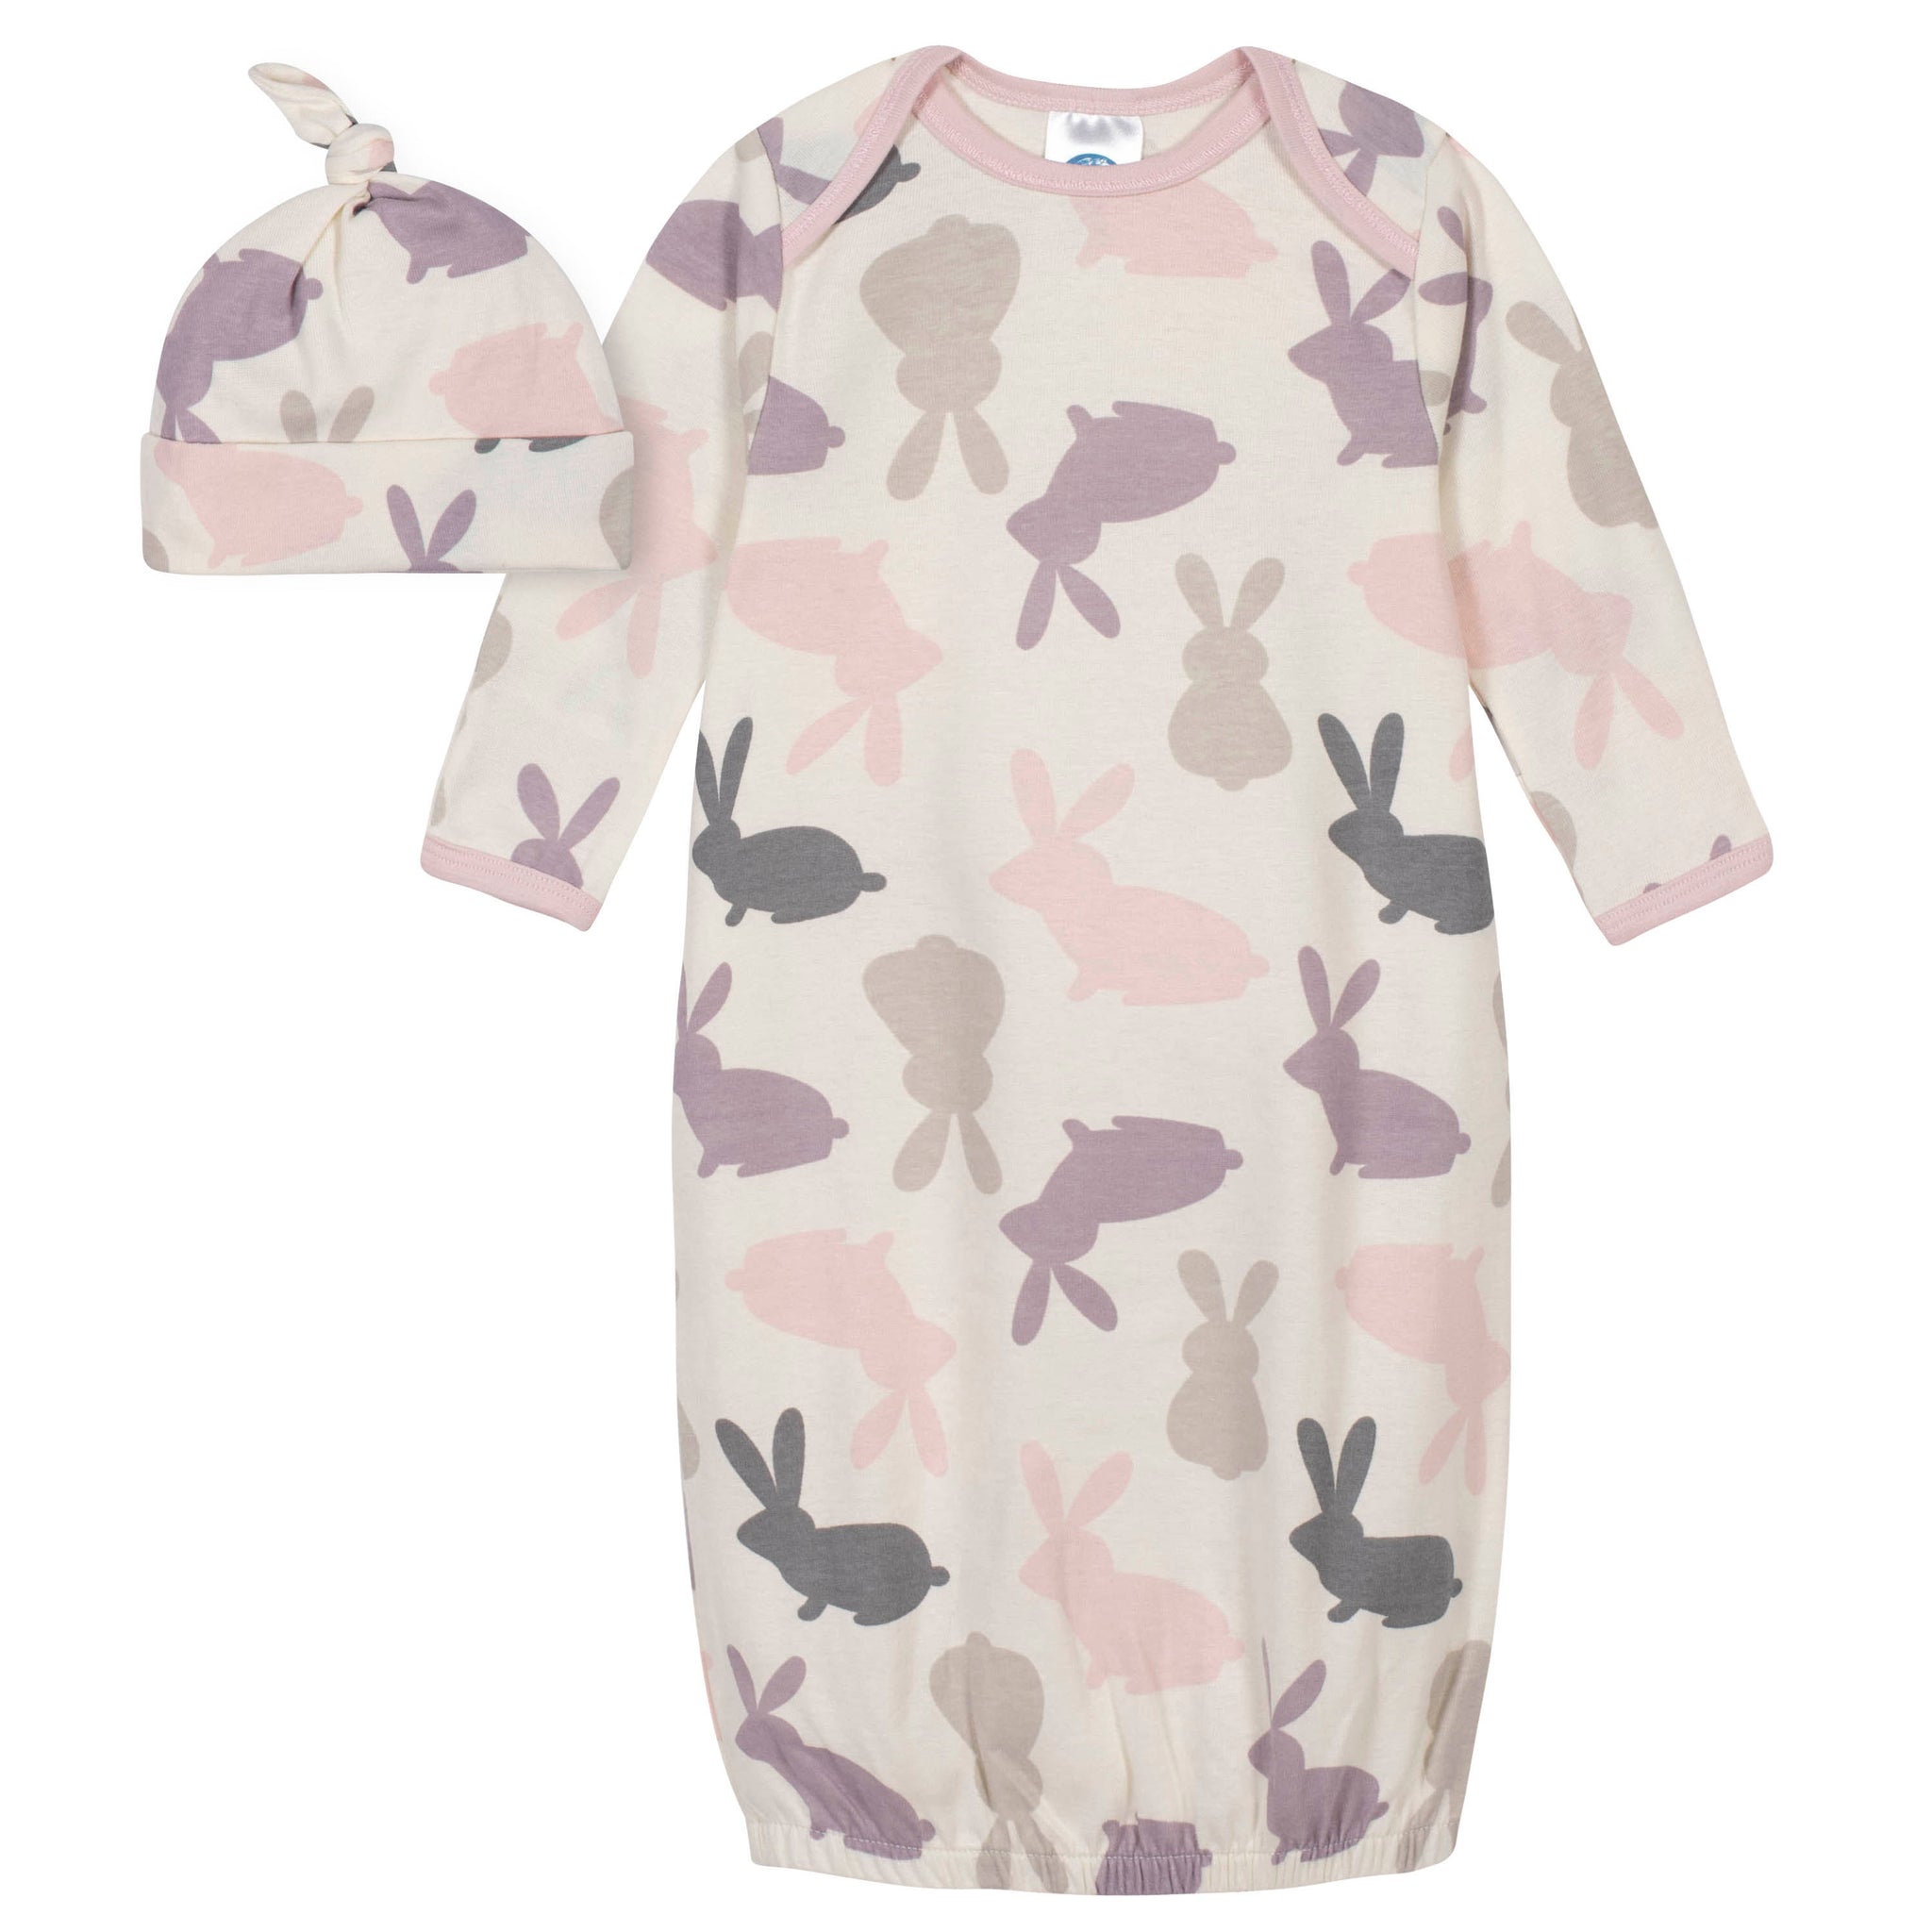 2-Piece Baby Girls Bunny Gown and Cap Set-Gerber Childrenswear Wholesale